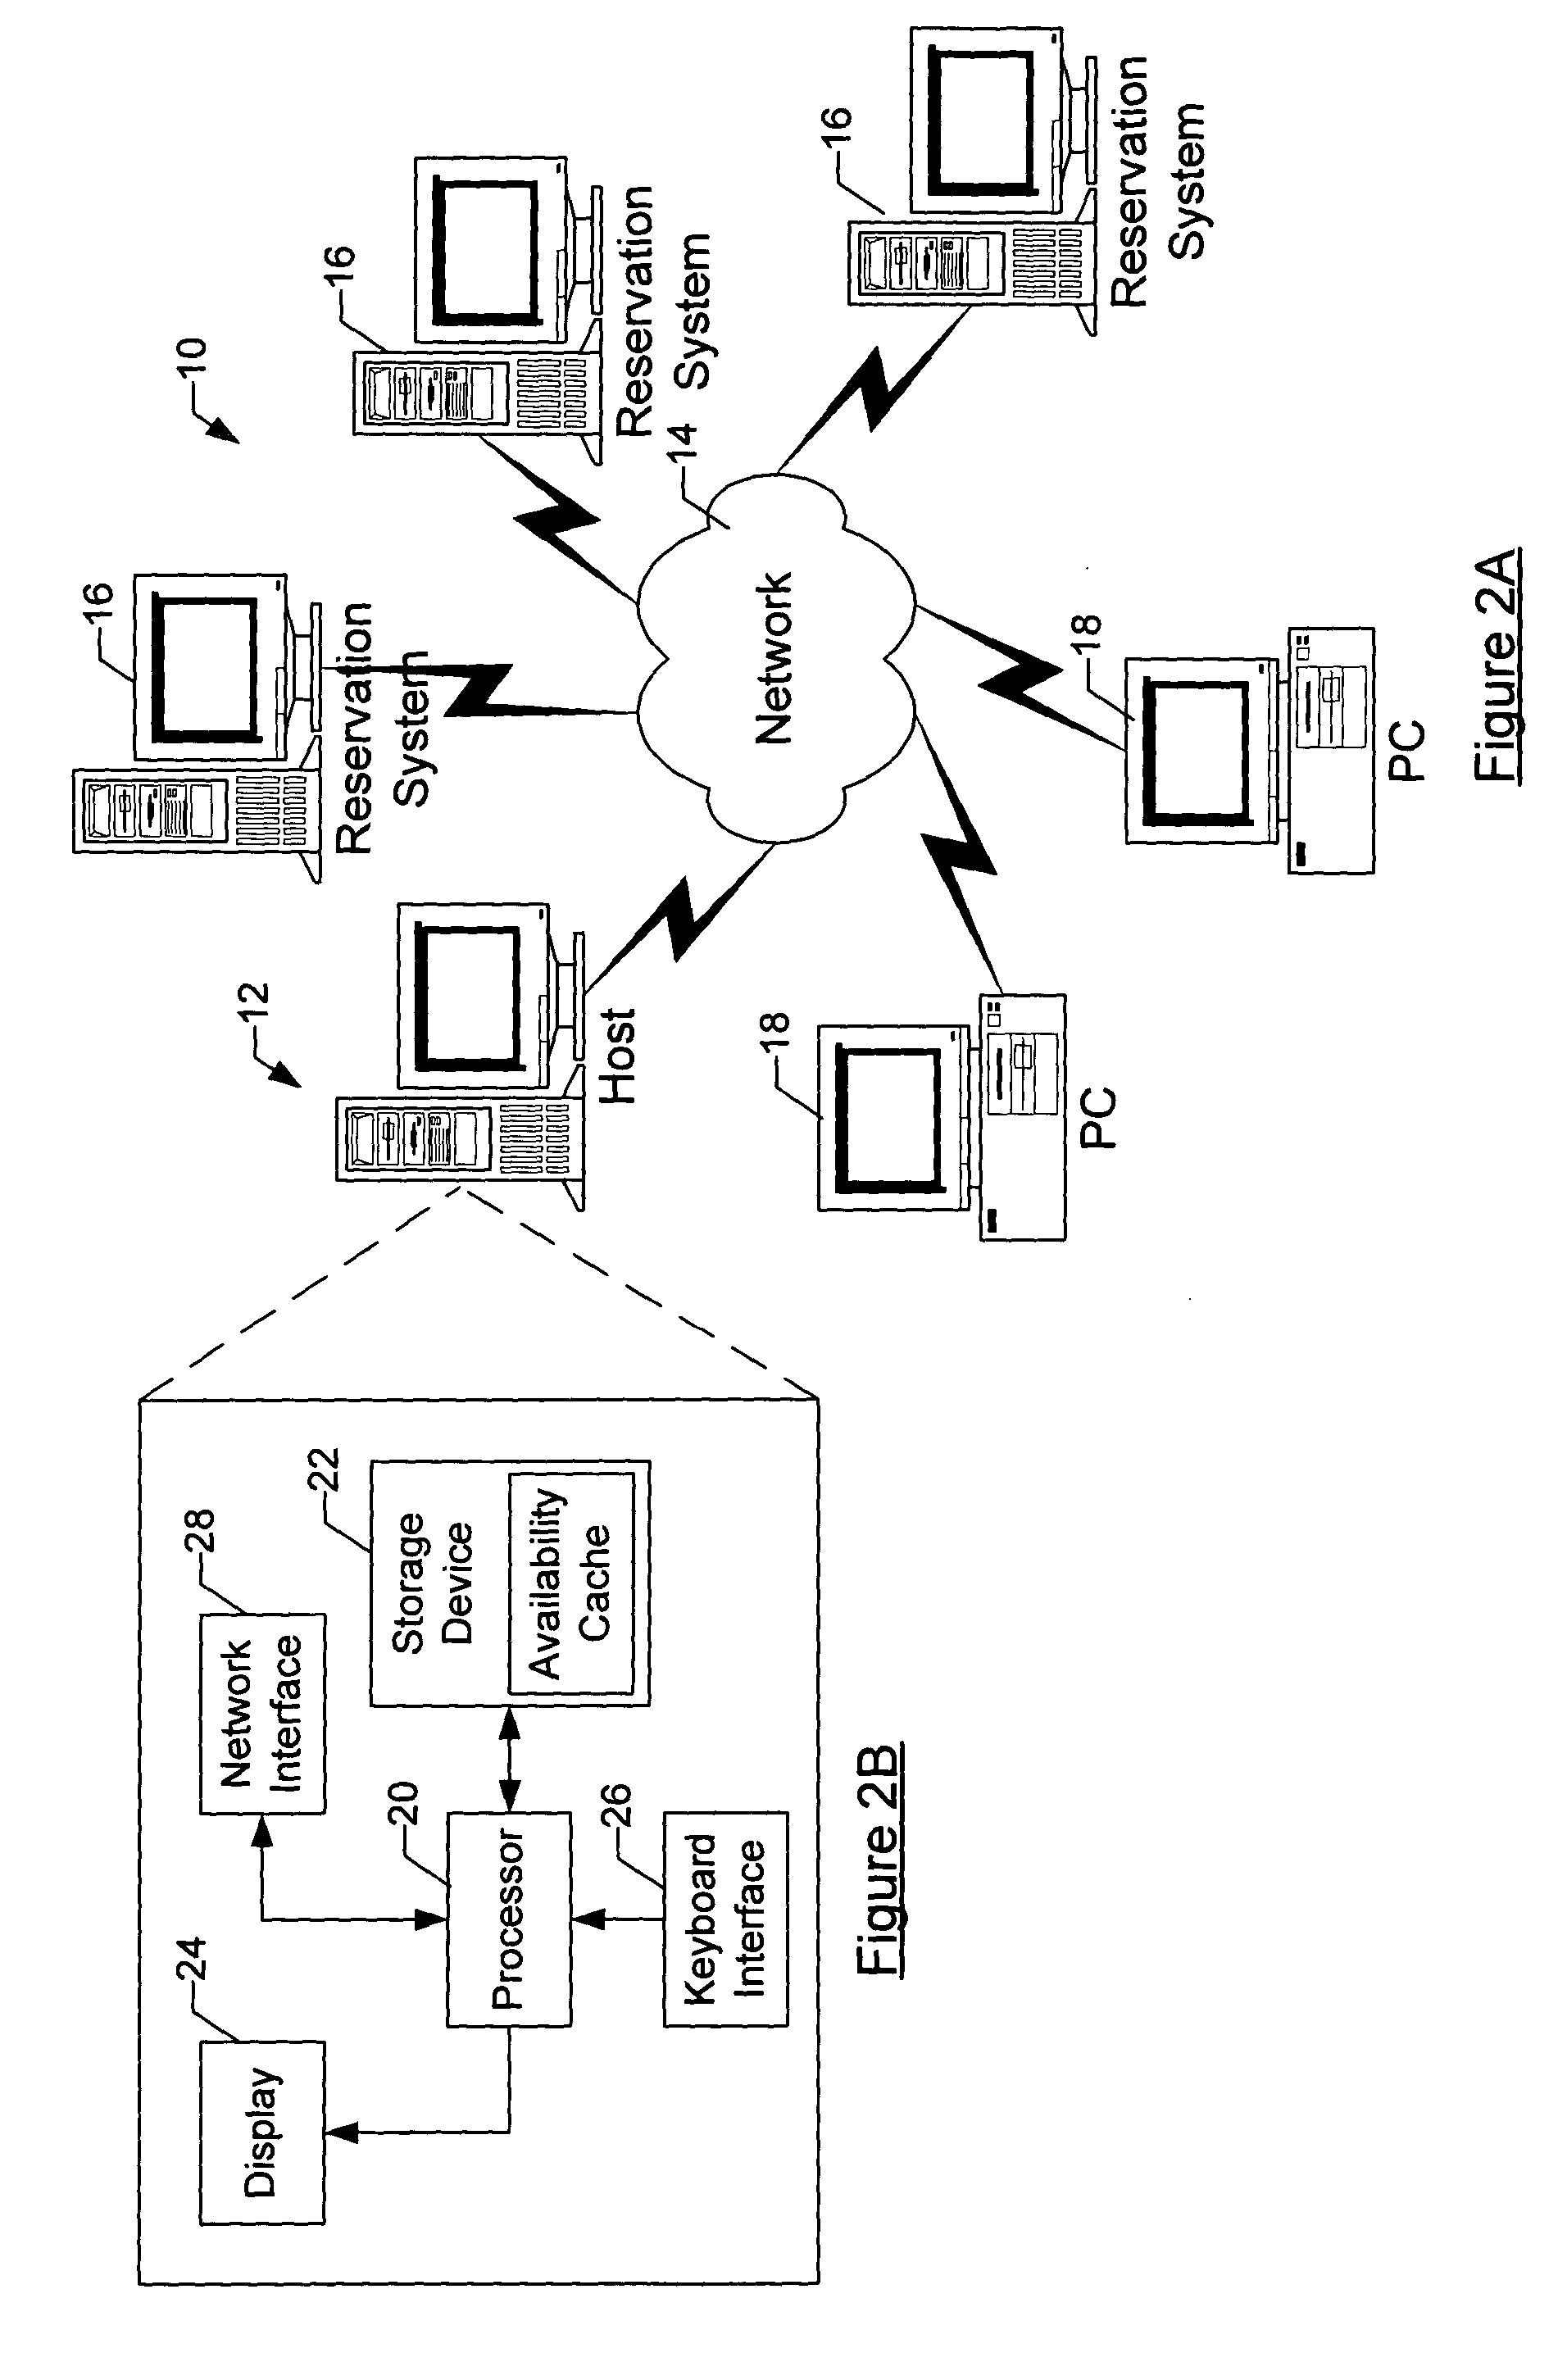 Systems, methods, and computer program products for storing and retrieving product availability information from a storage cache